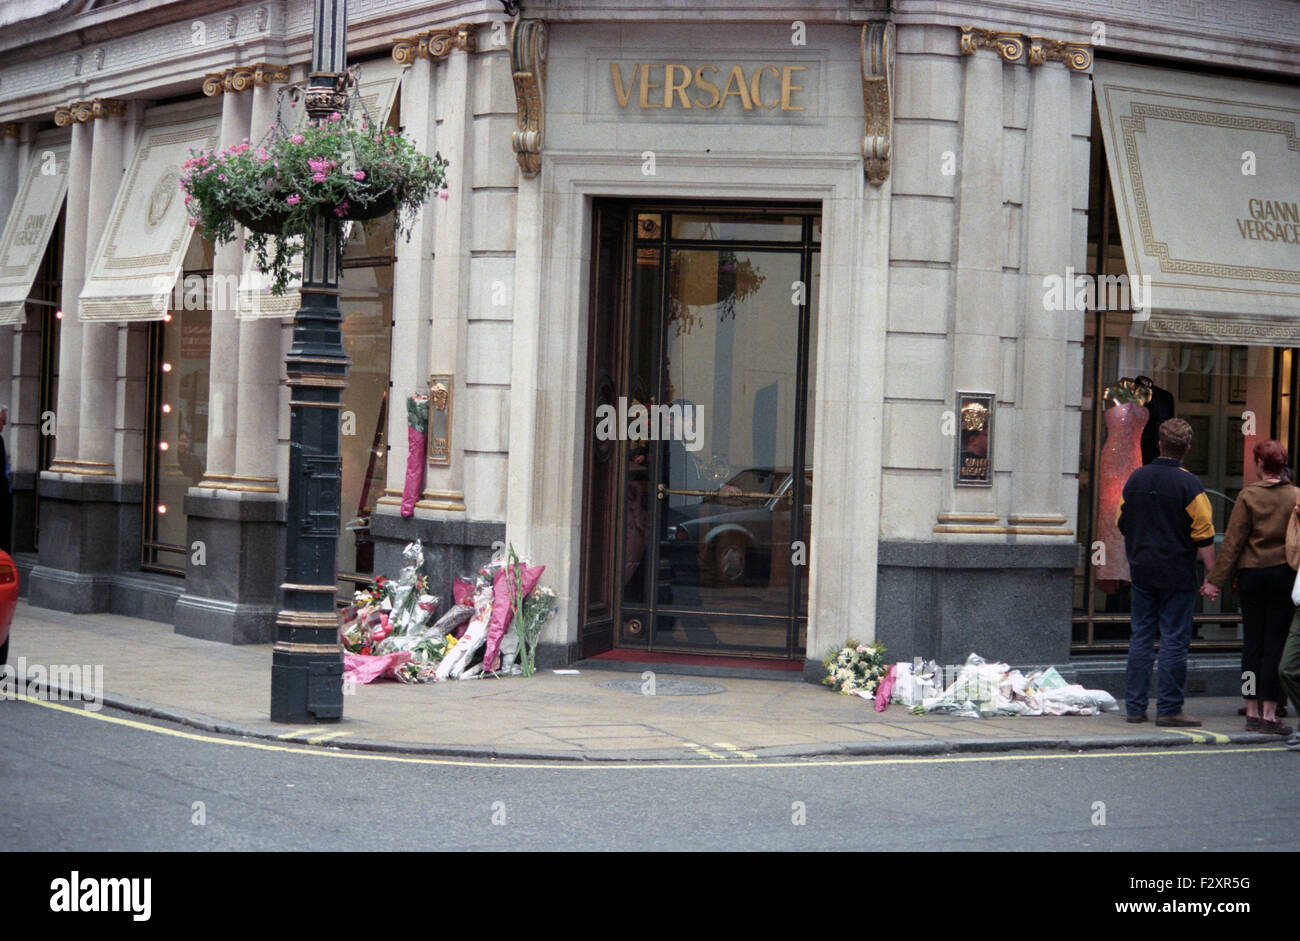 Inspiration icons  - Page 2 Flowers-outside-versace-bond-street-london-after-his-murder1997-F2XR5G